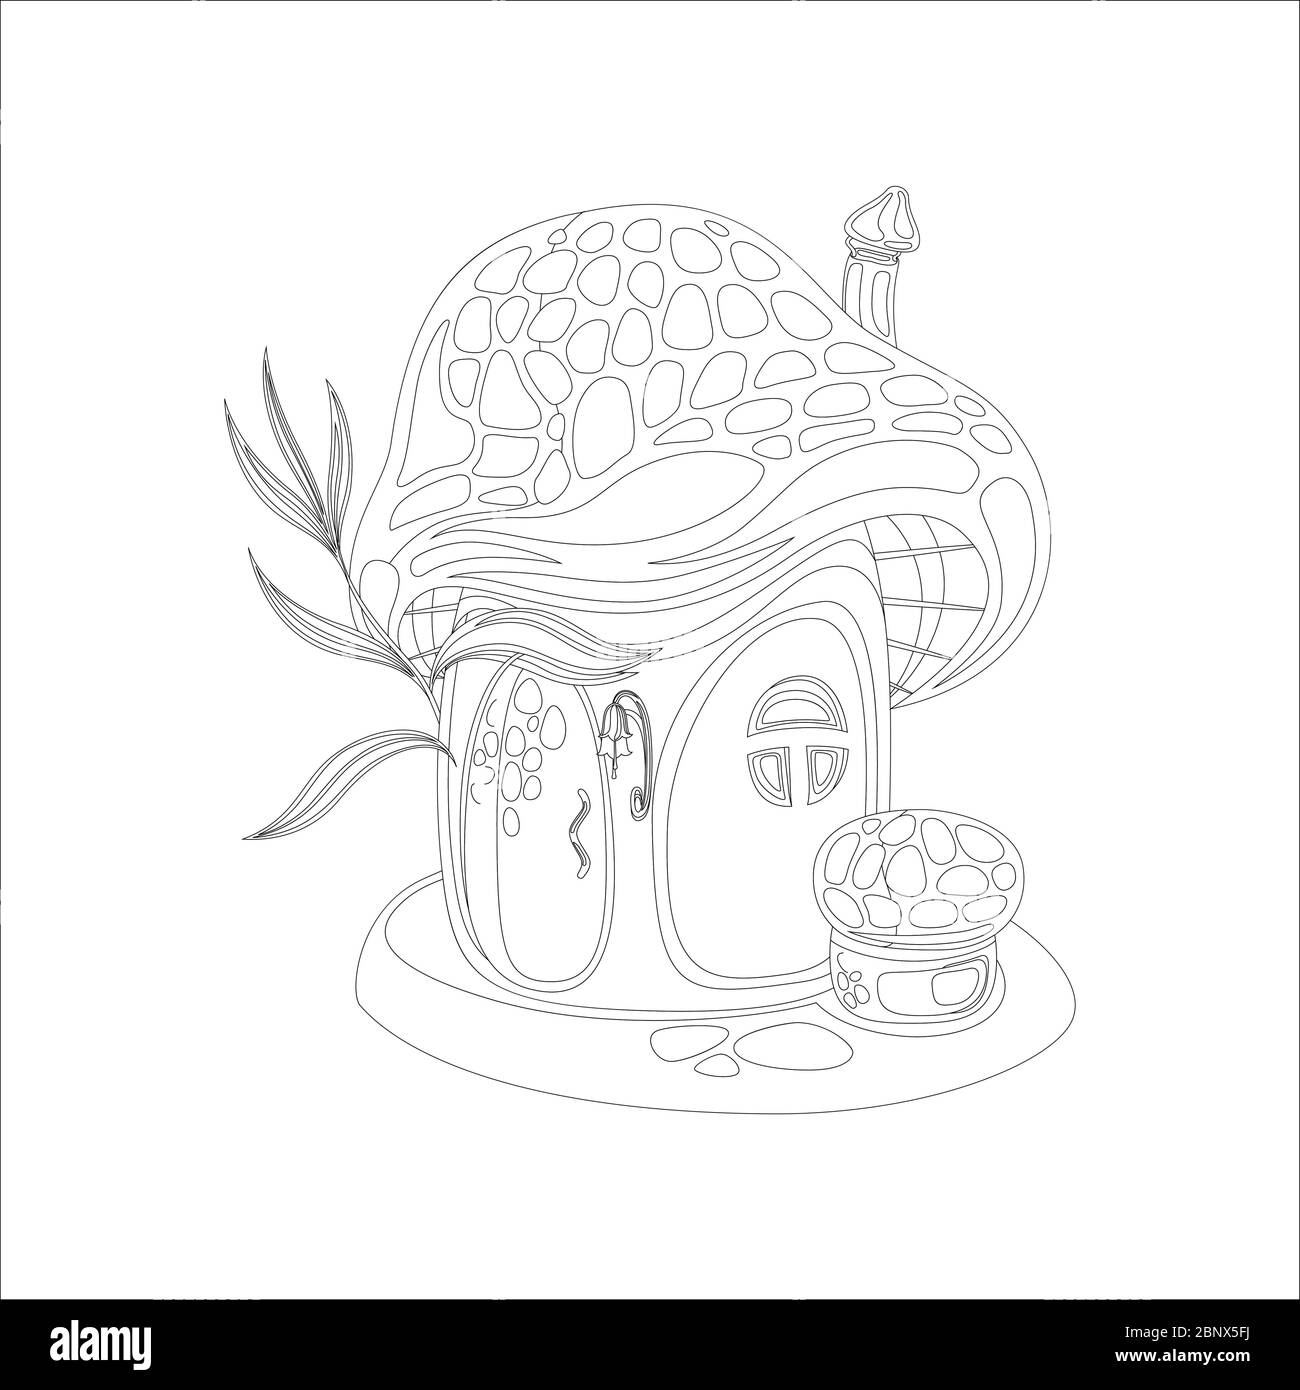 Coloring page with mushroom fairy tale house. Vector illustration Stock Vector